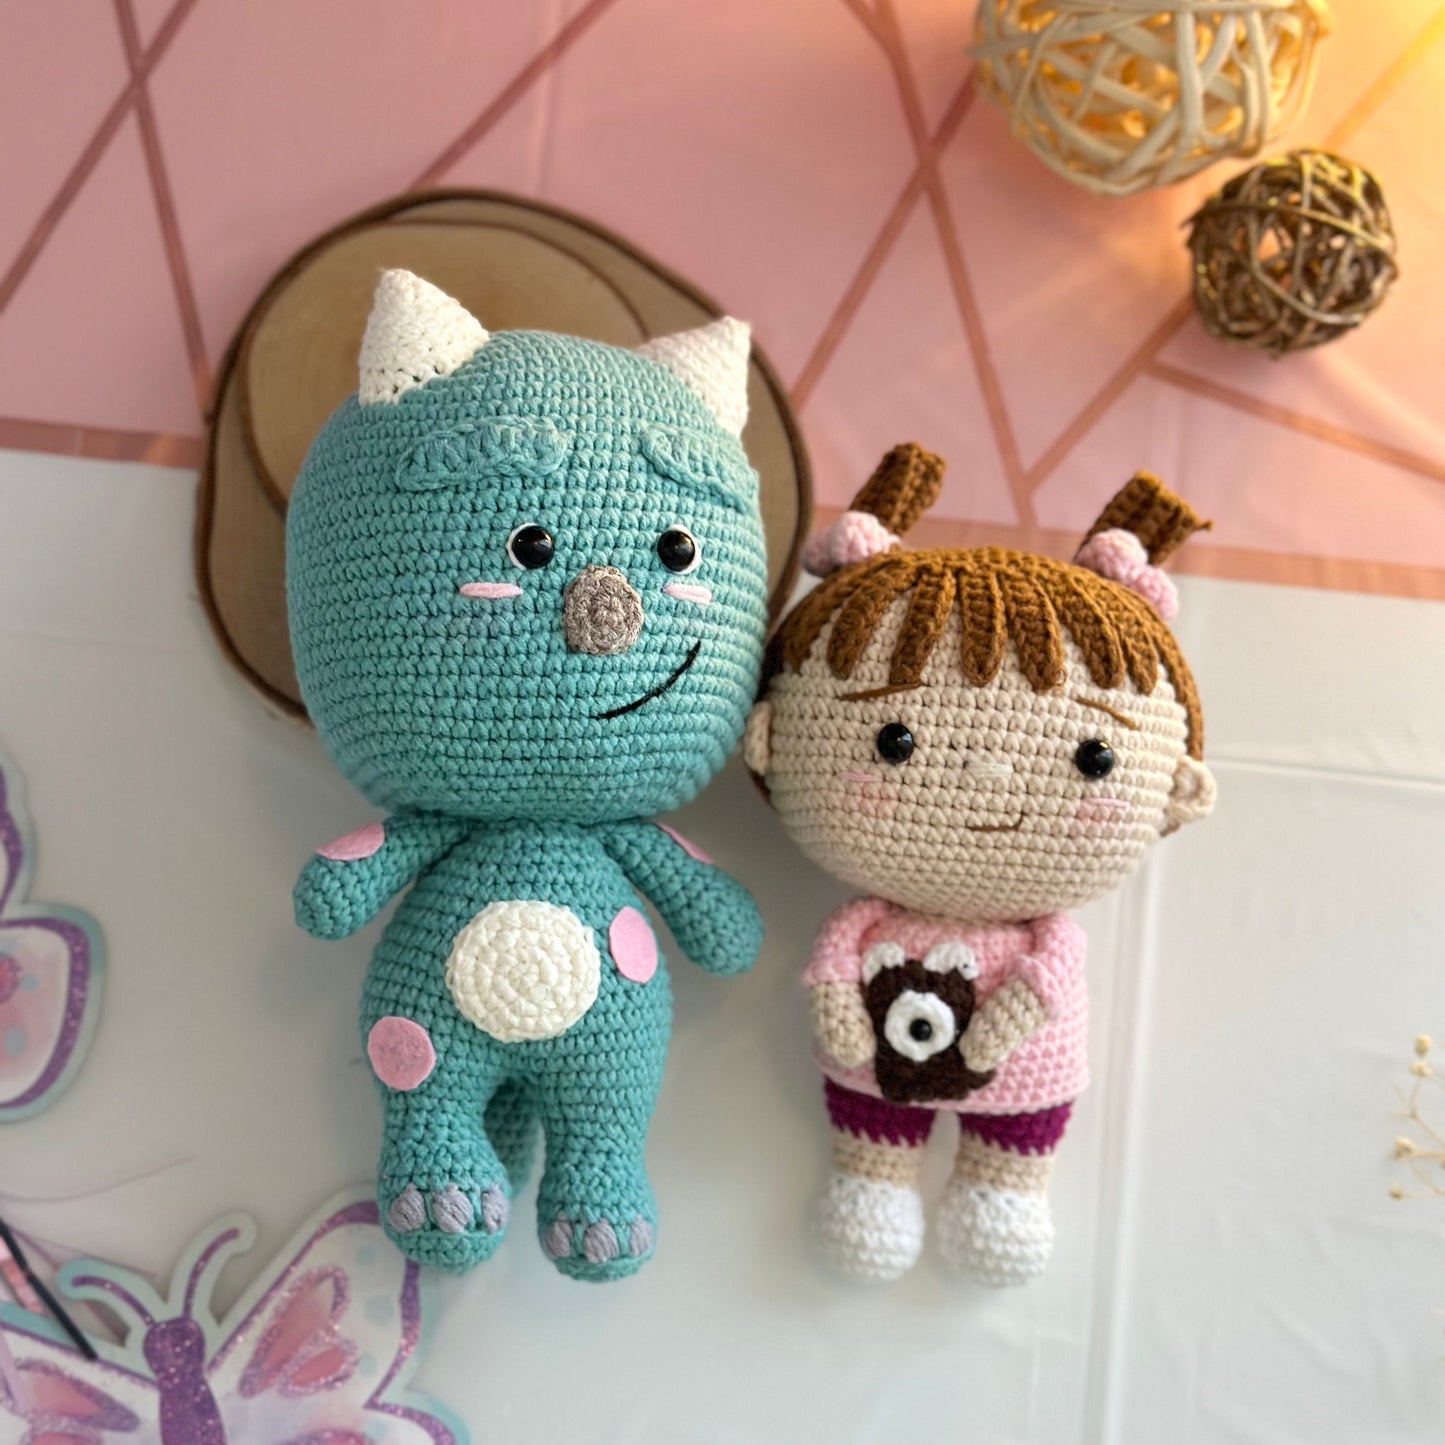 Handmade Monster Crochet, Amigurumi Sully, Boo Doll, Mike, Crochet Toys Inspired By Monster Inc. plushie toy, cute gift